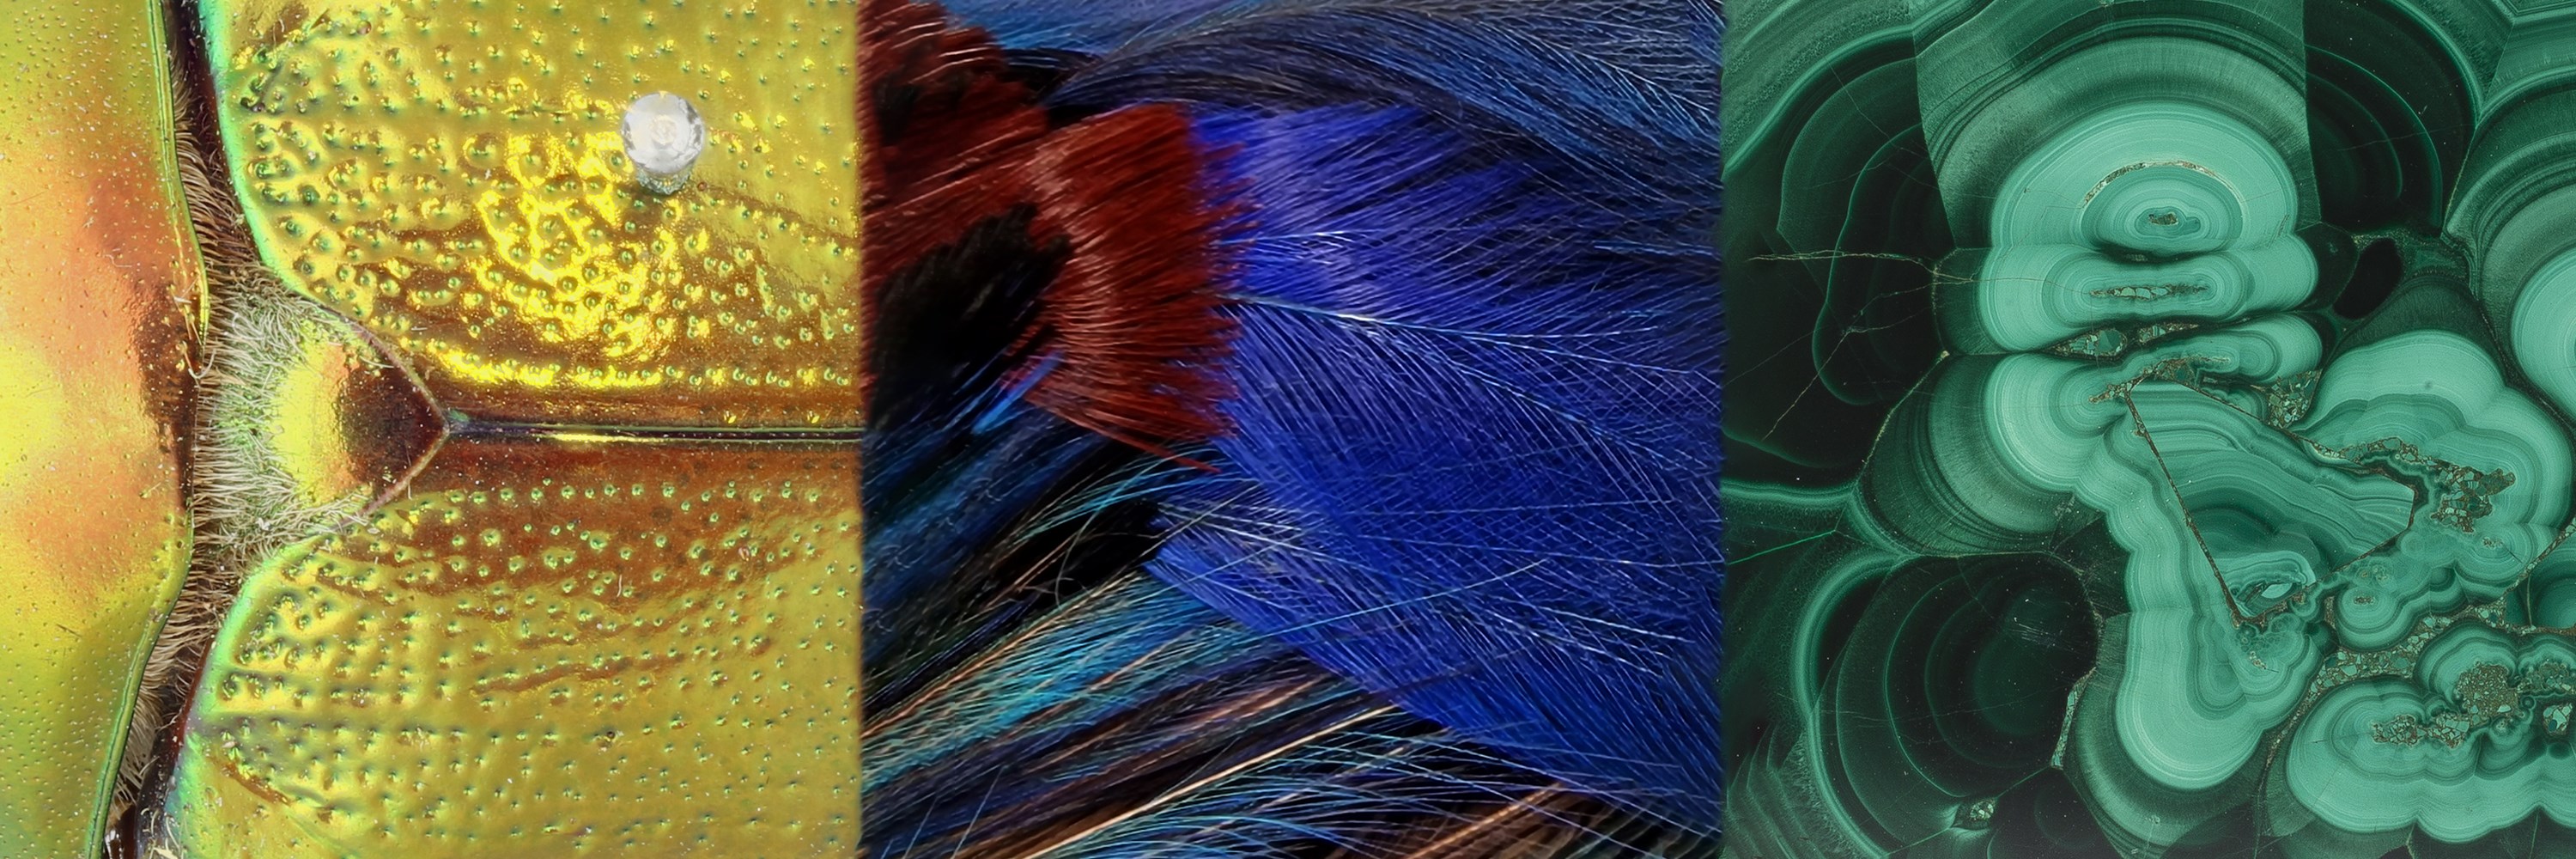 A triptych image comprising of close-up details of (left to right) a beetle's wing case, bird feathers and a green mineral.